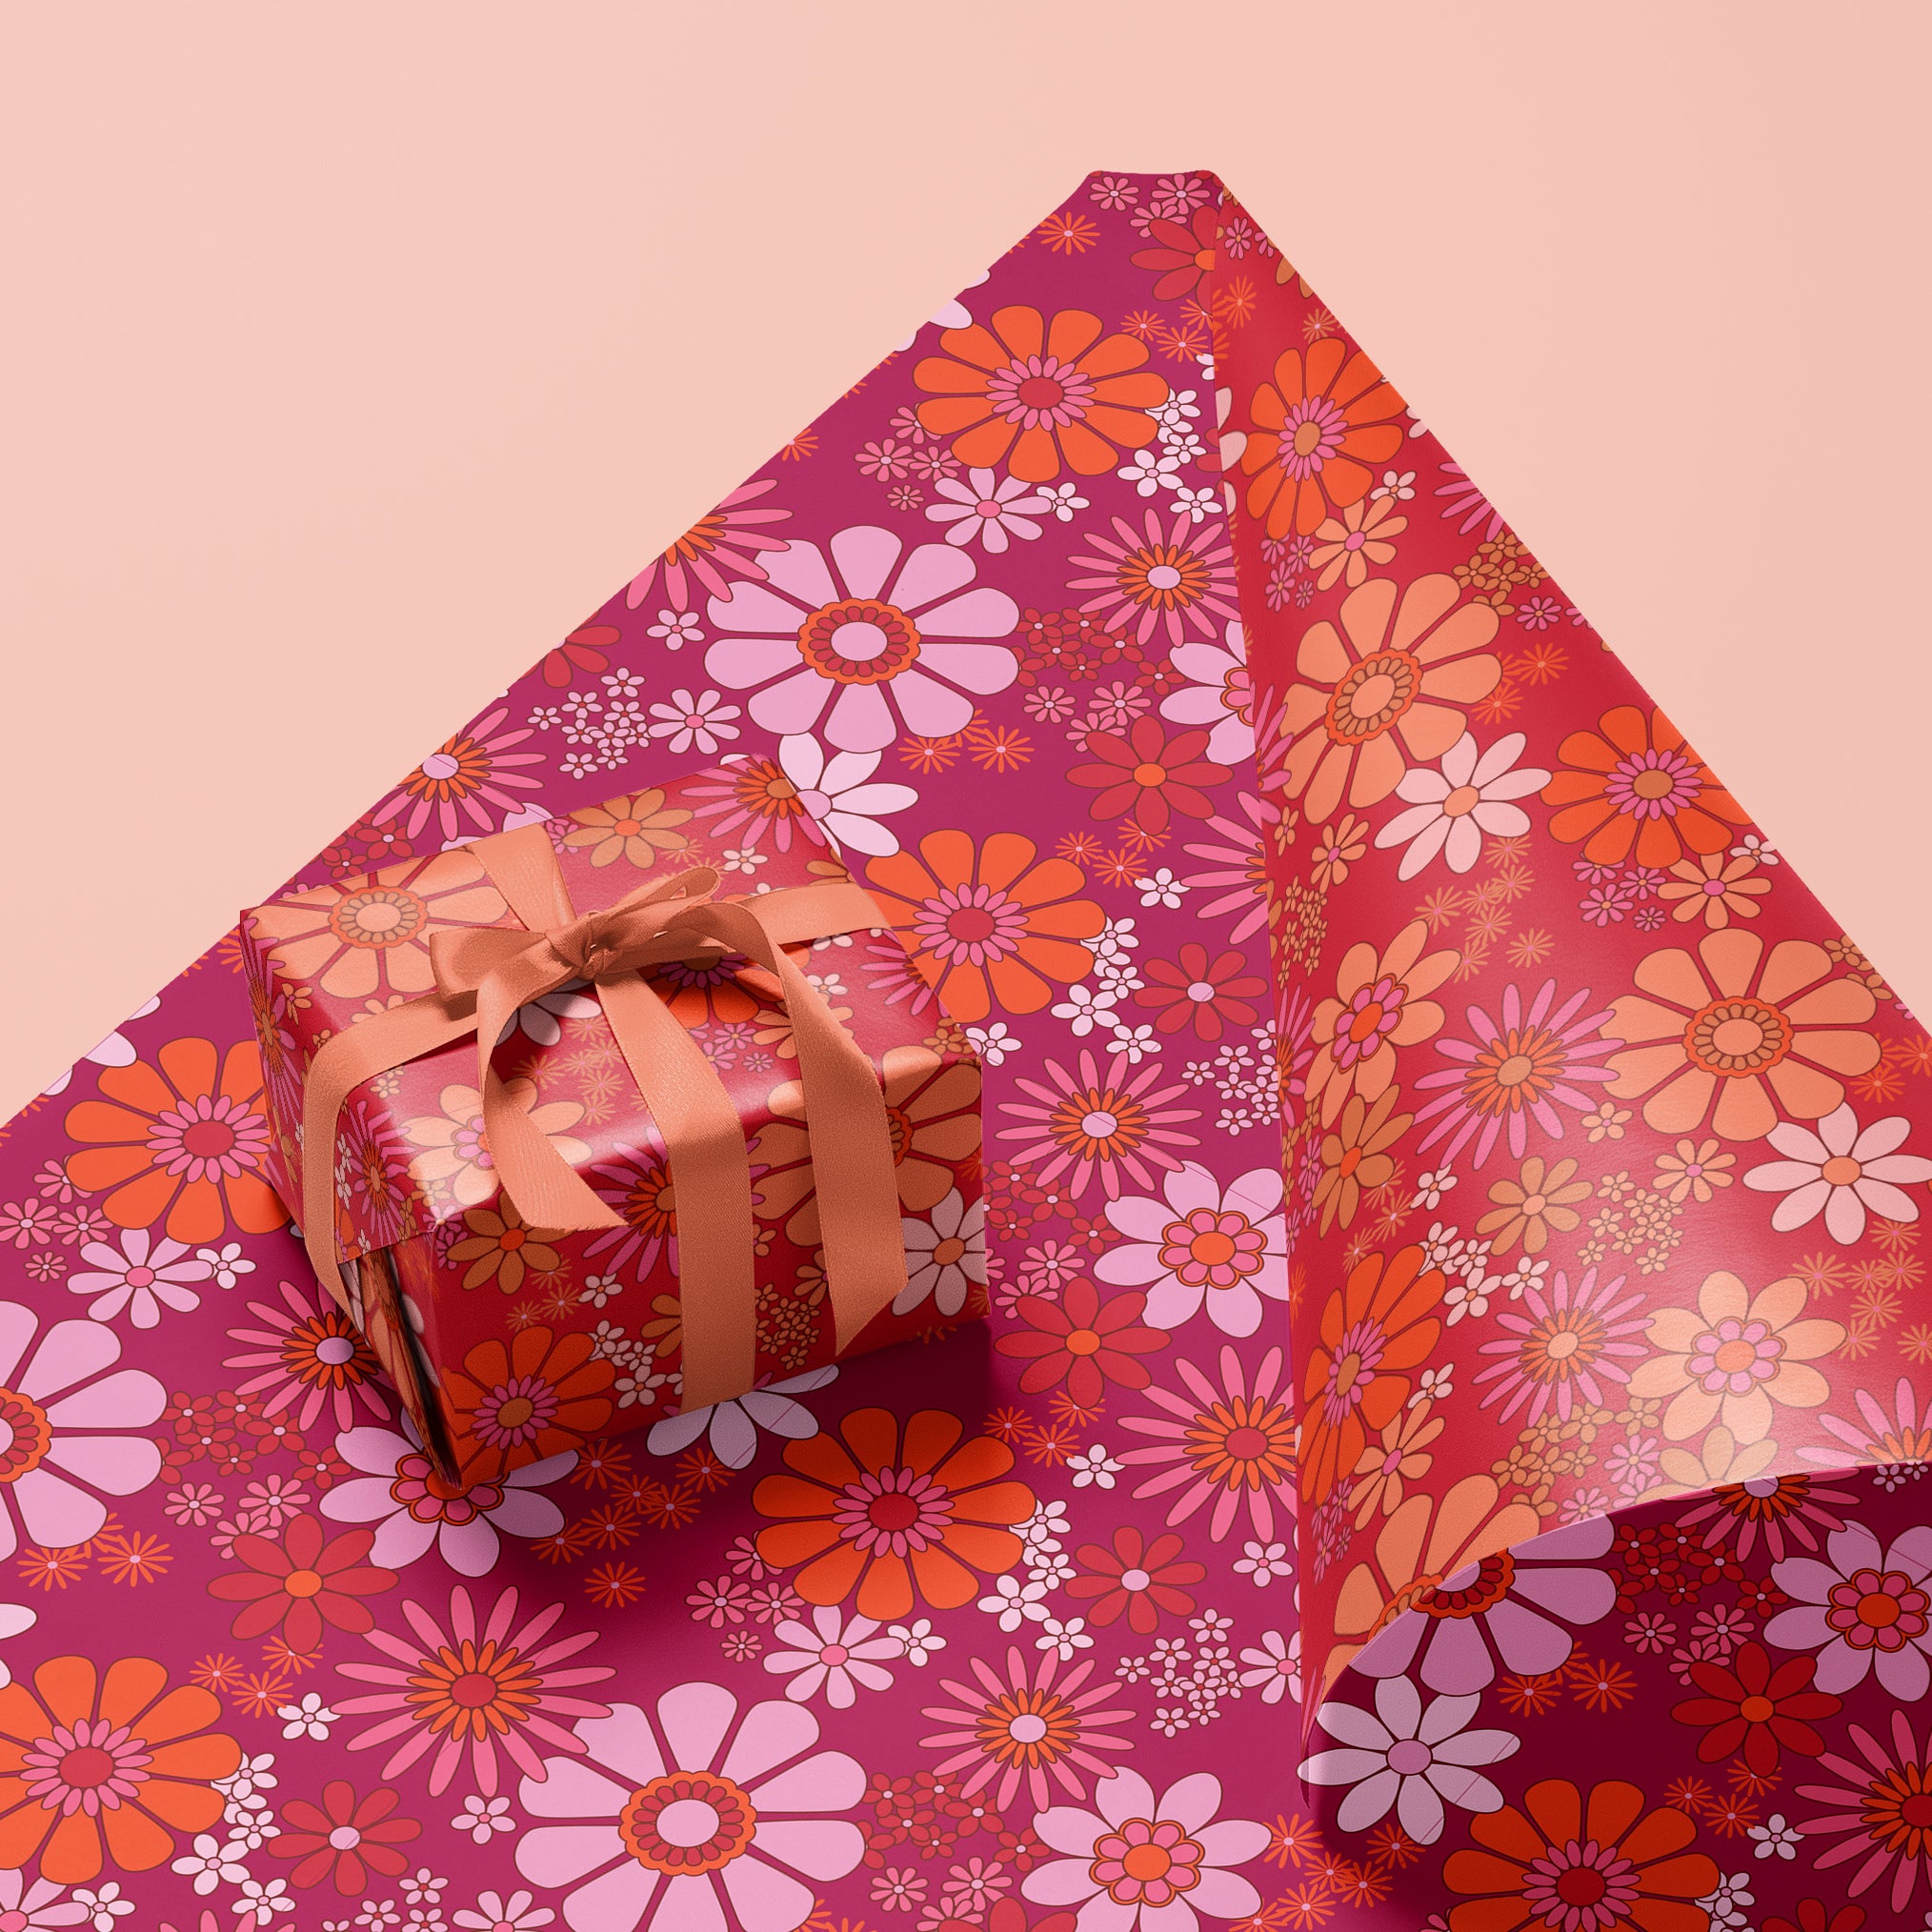 On a pink background is a hot pink and orange floral gift wrap.